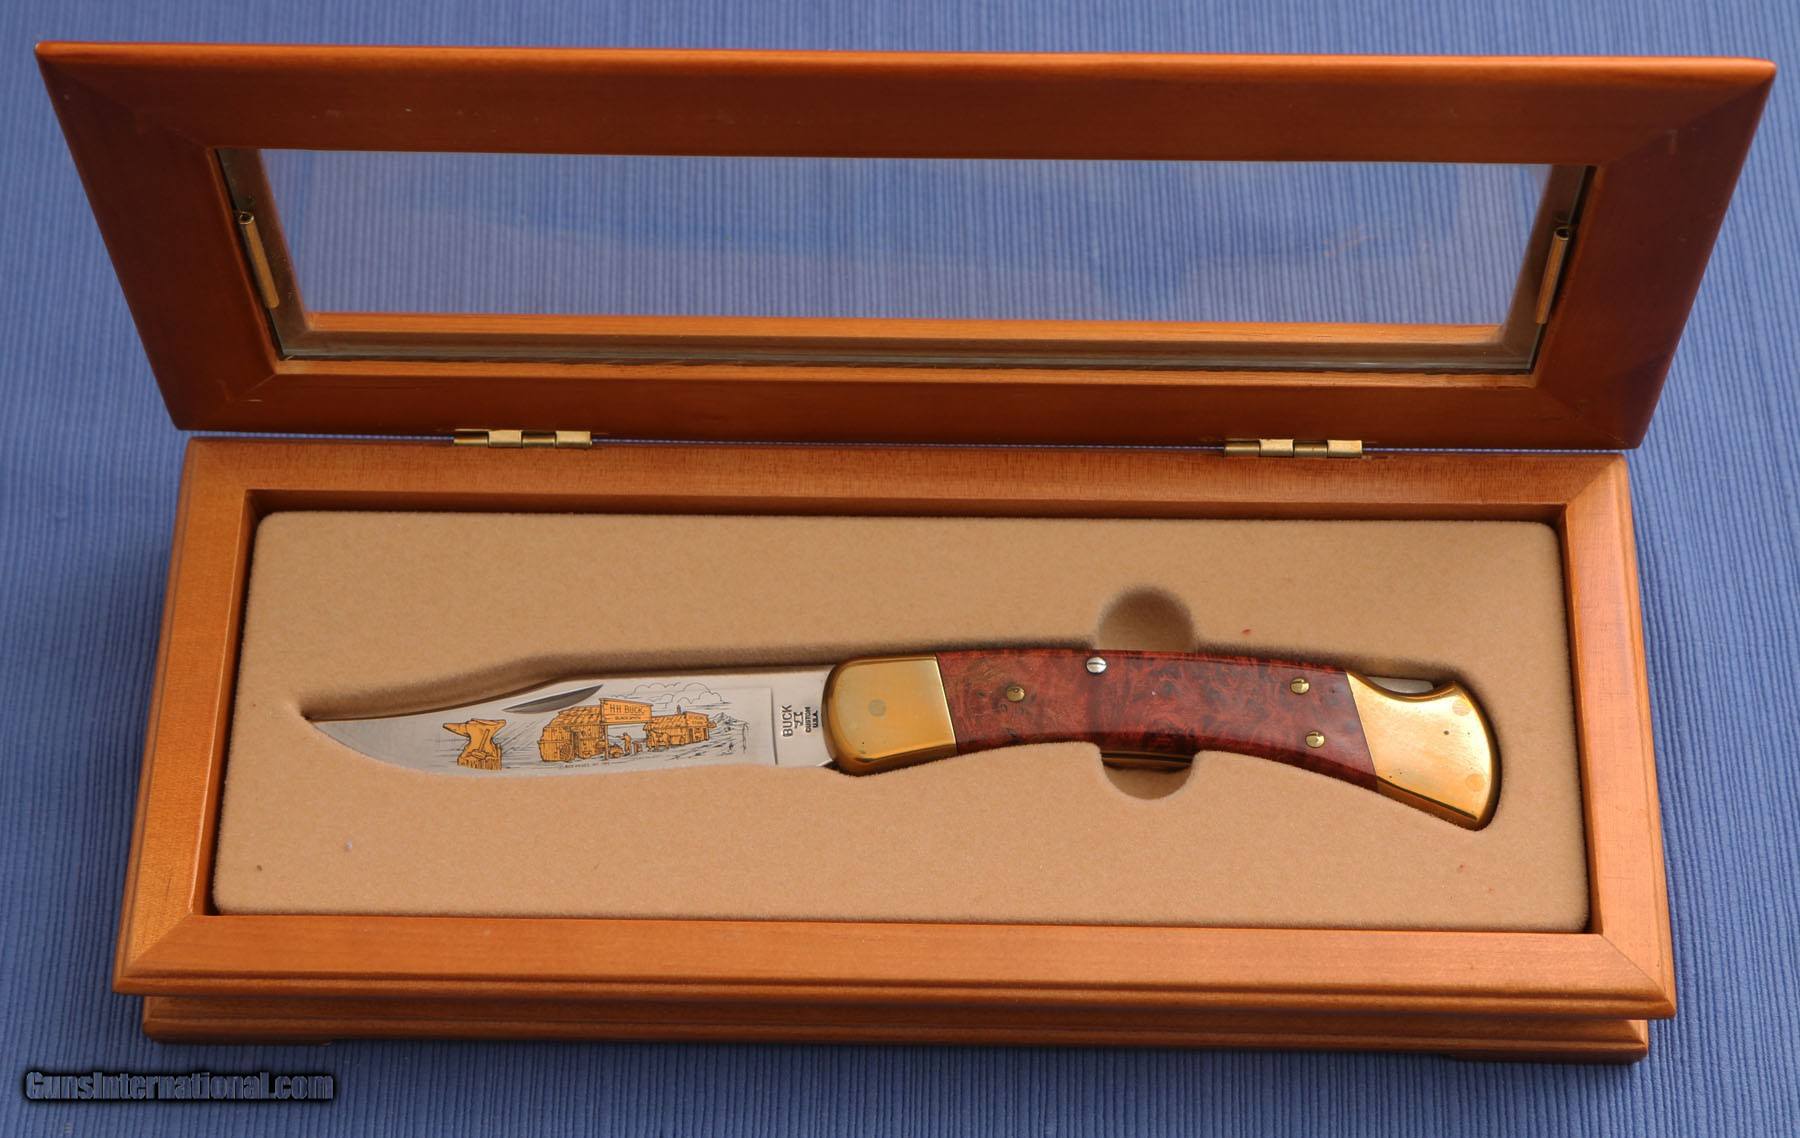 Sold at Auction: Buck 110 & Cooking Guild Knives, Scope, Cleaning